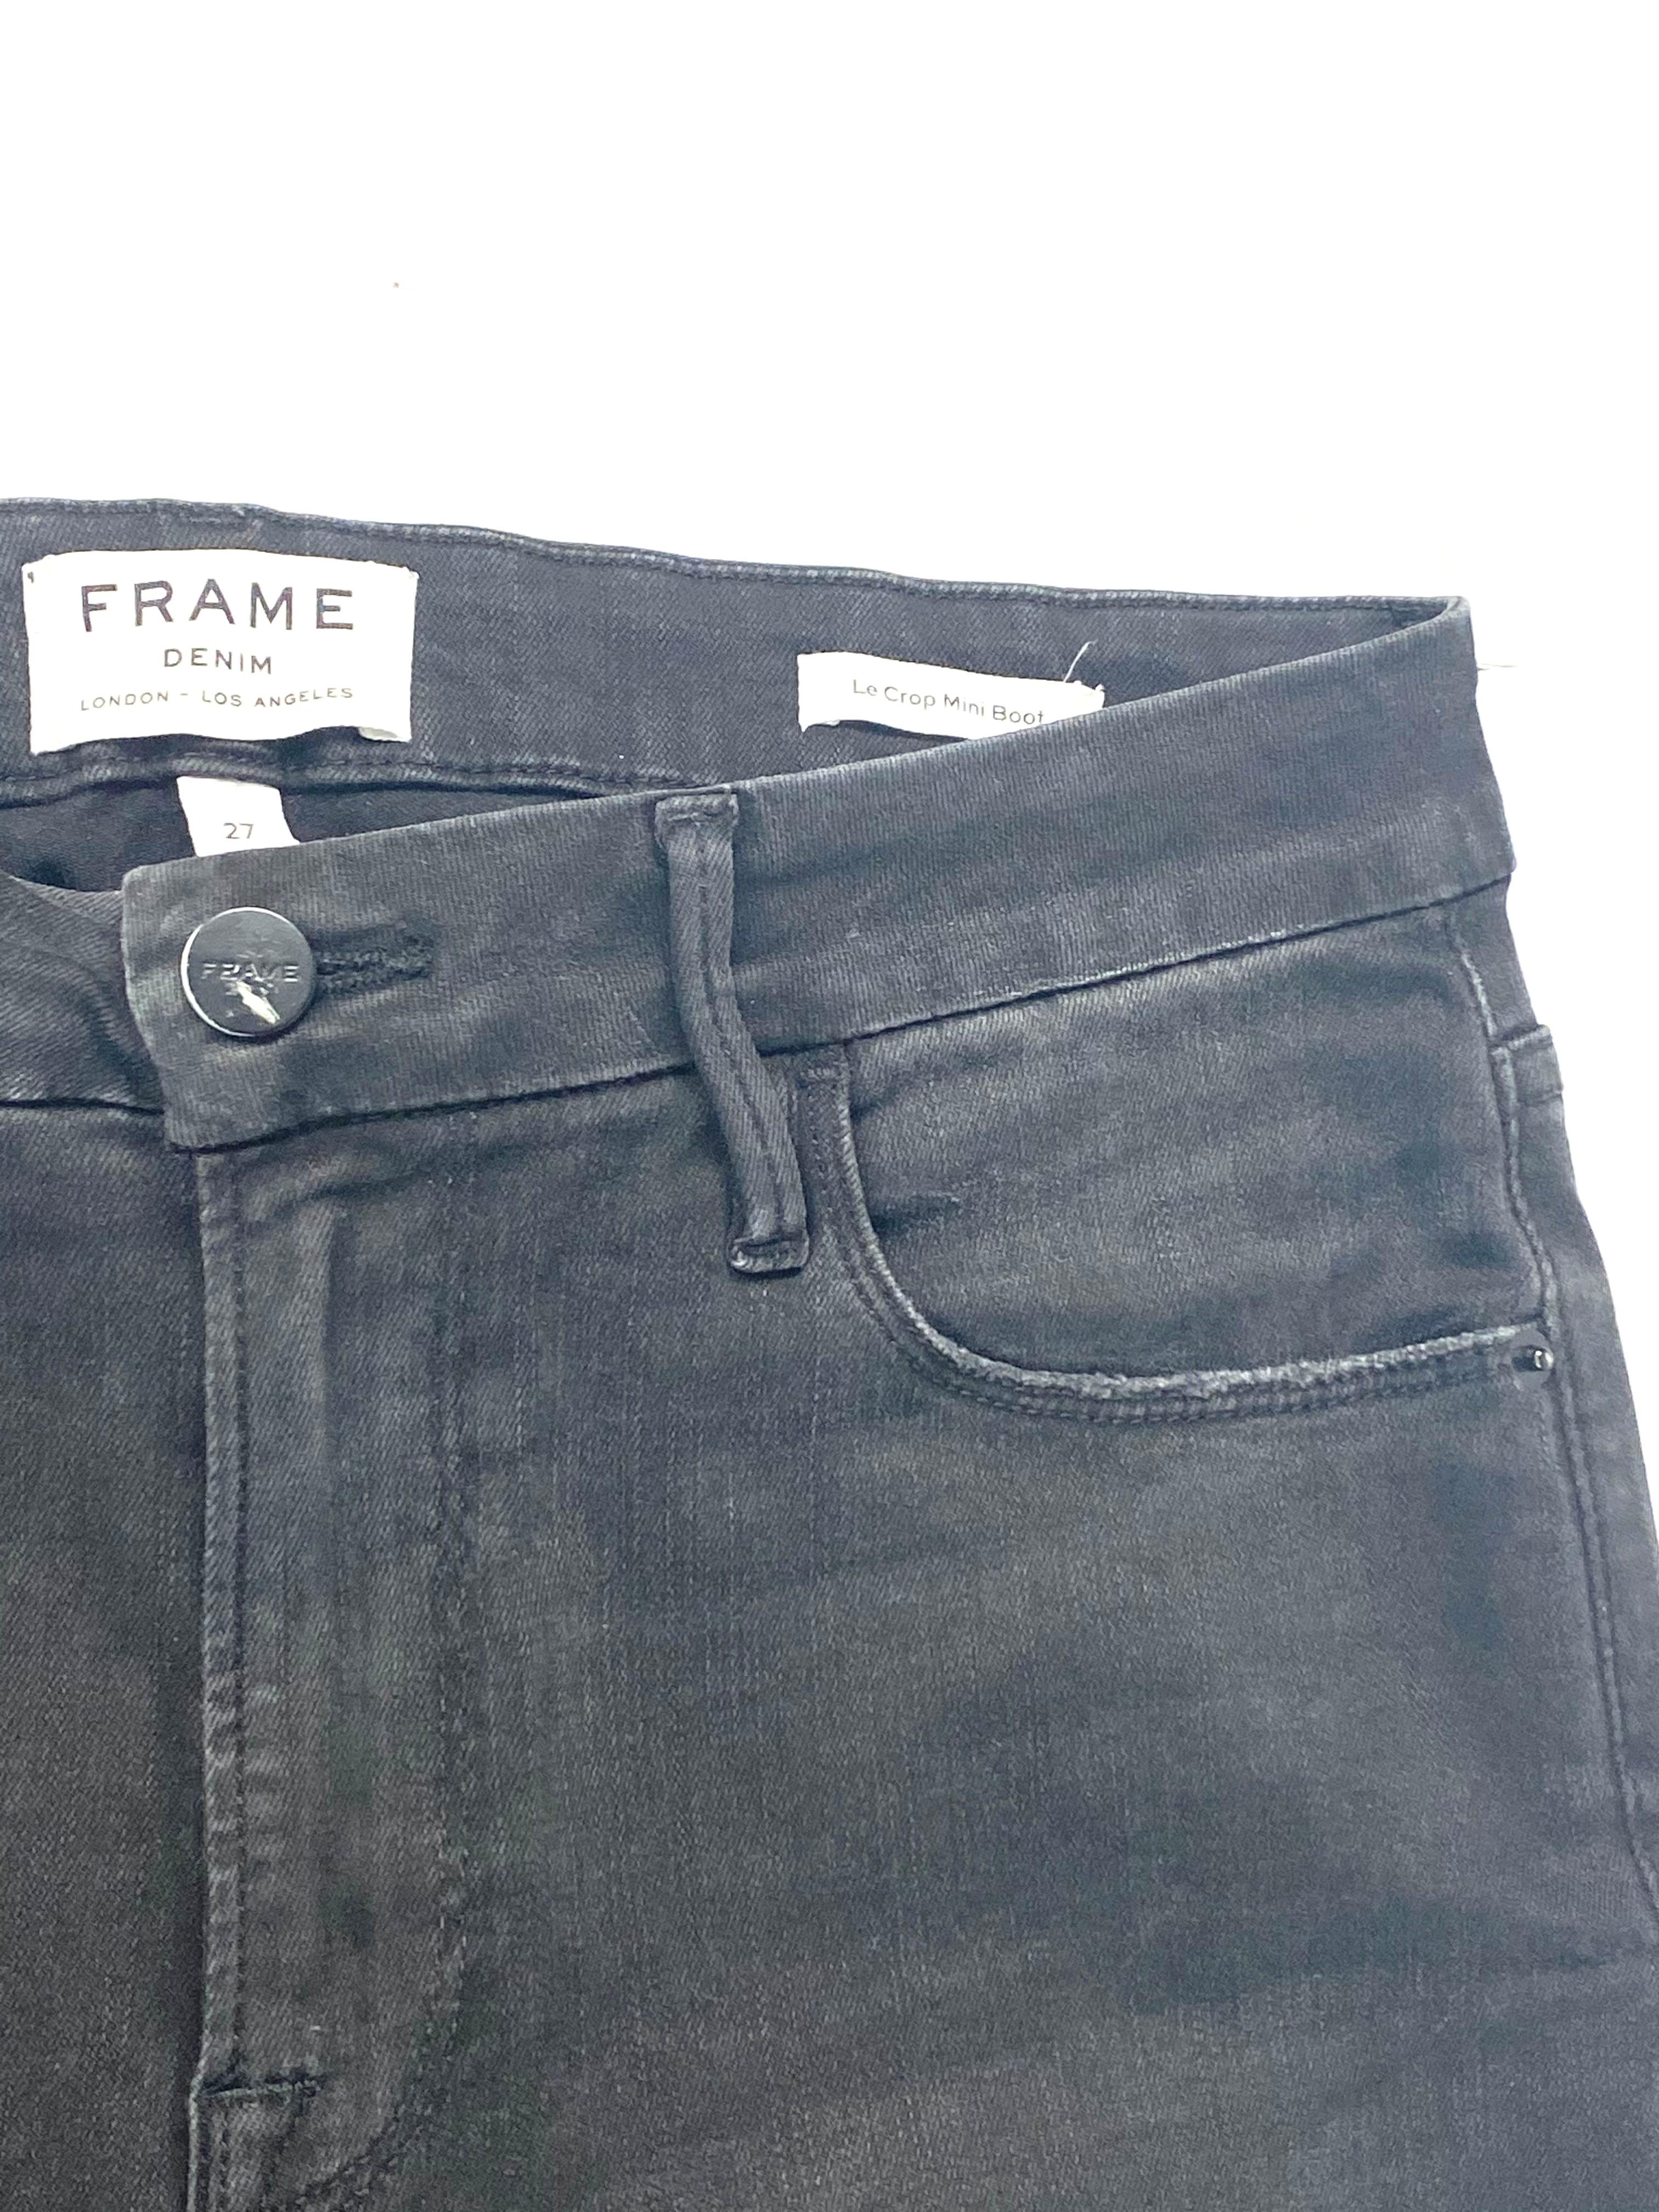 Product details:

The jeans feature dark grey/ black wash, high raise fit, cropped and stretch material.